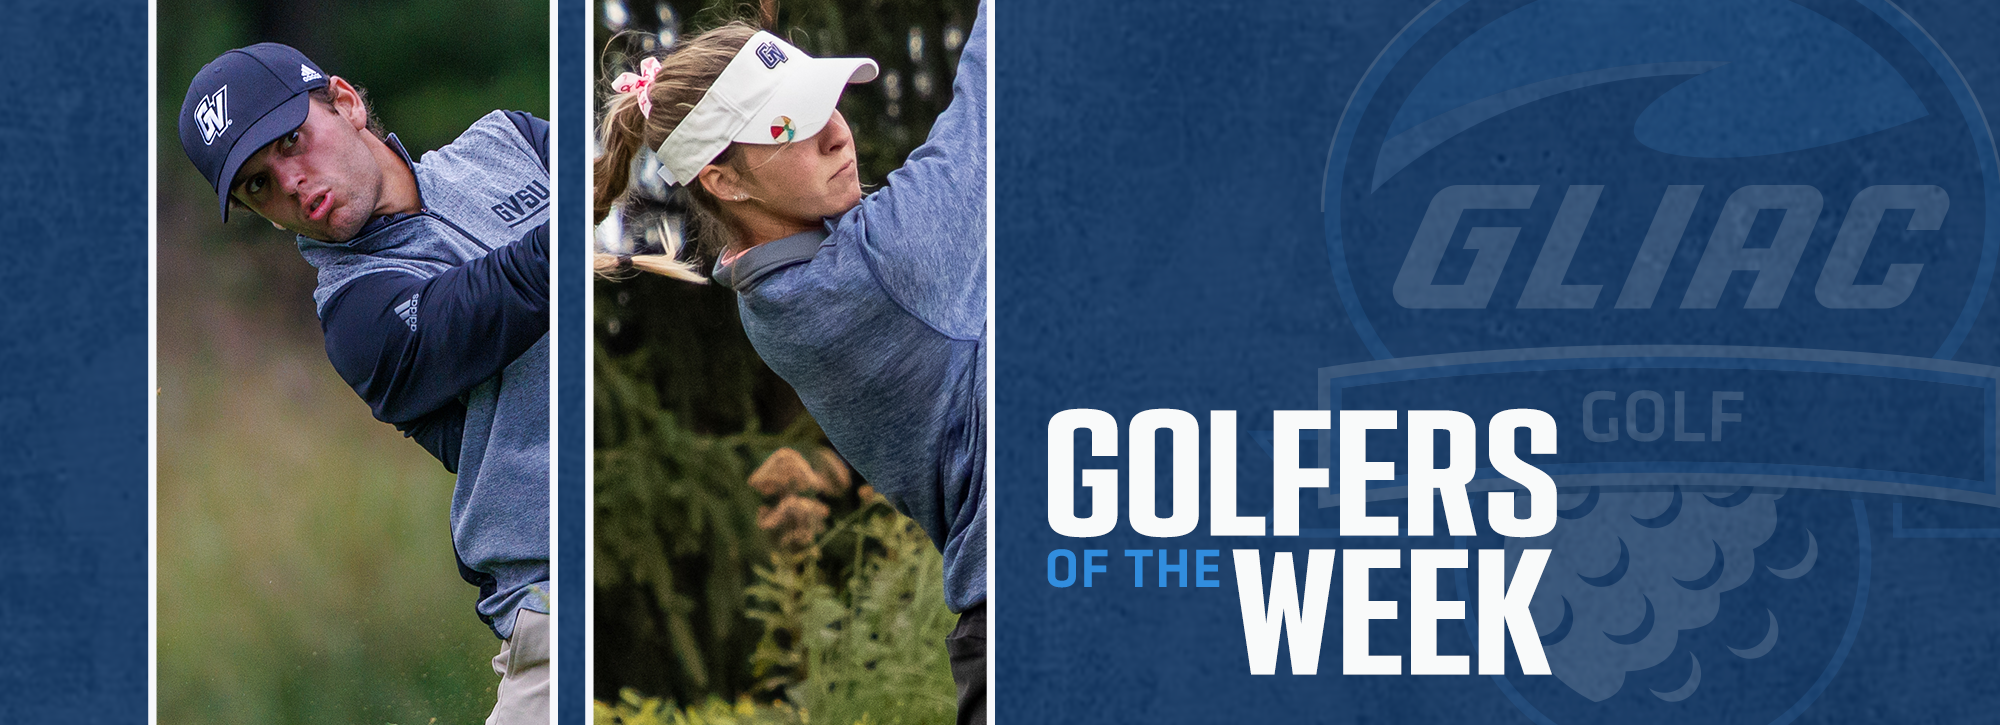 GVSU's Krueger and Stoll earn golfer of the week honors